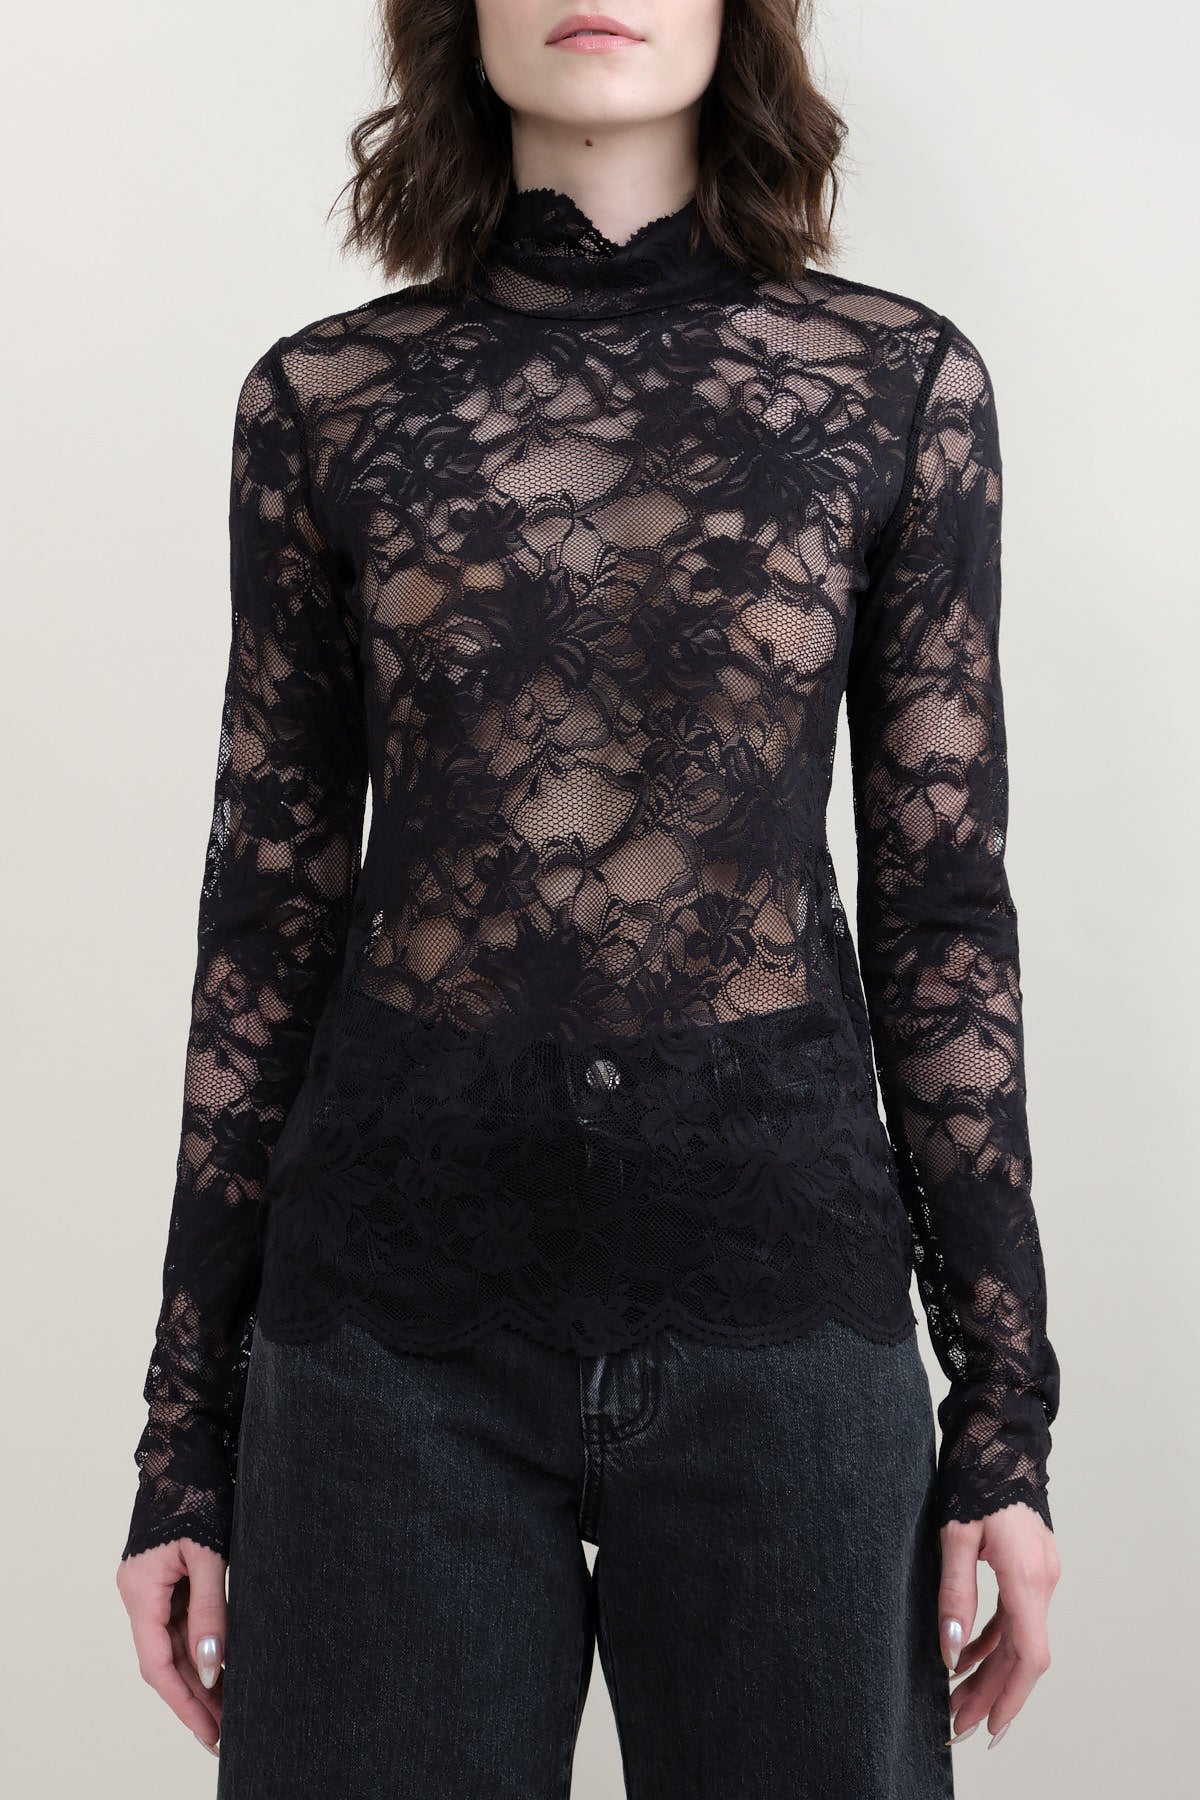 black lace recall top from rachel comey